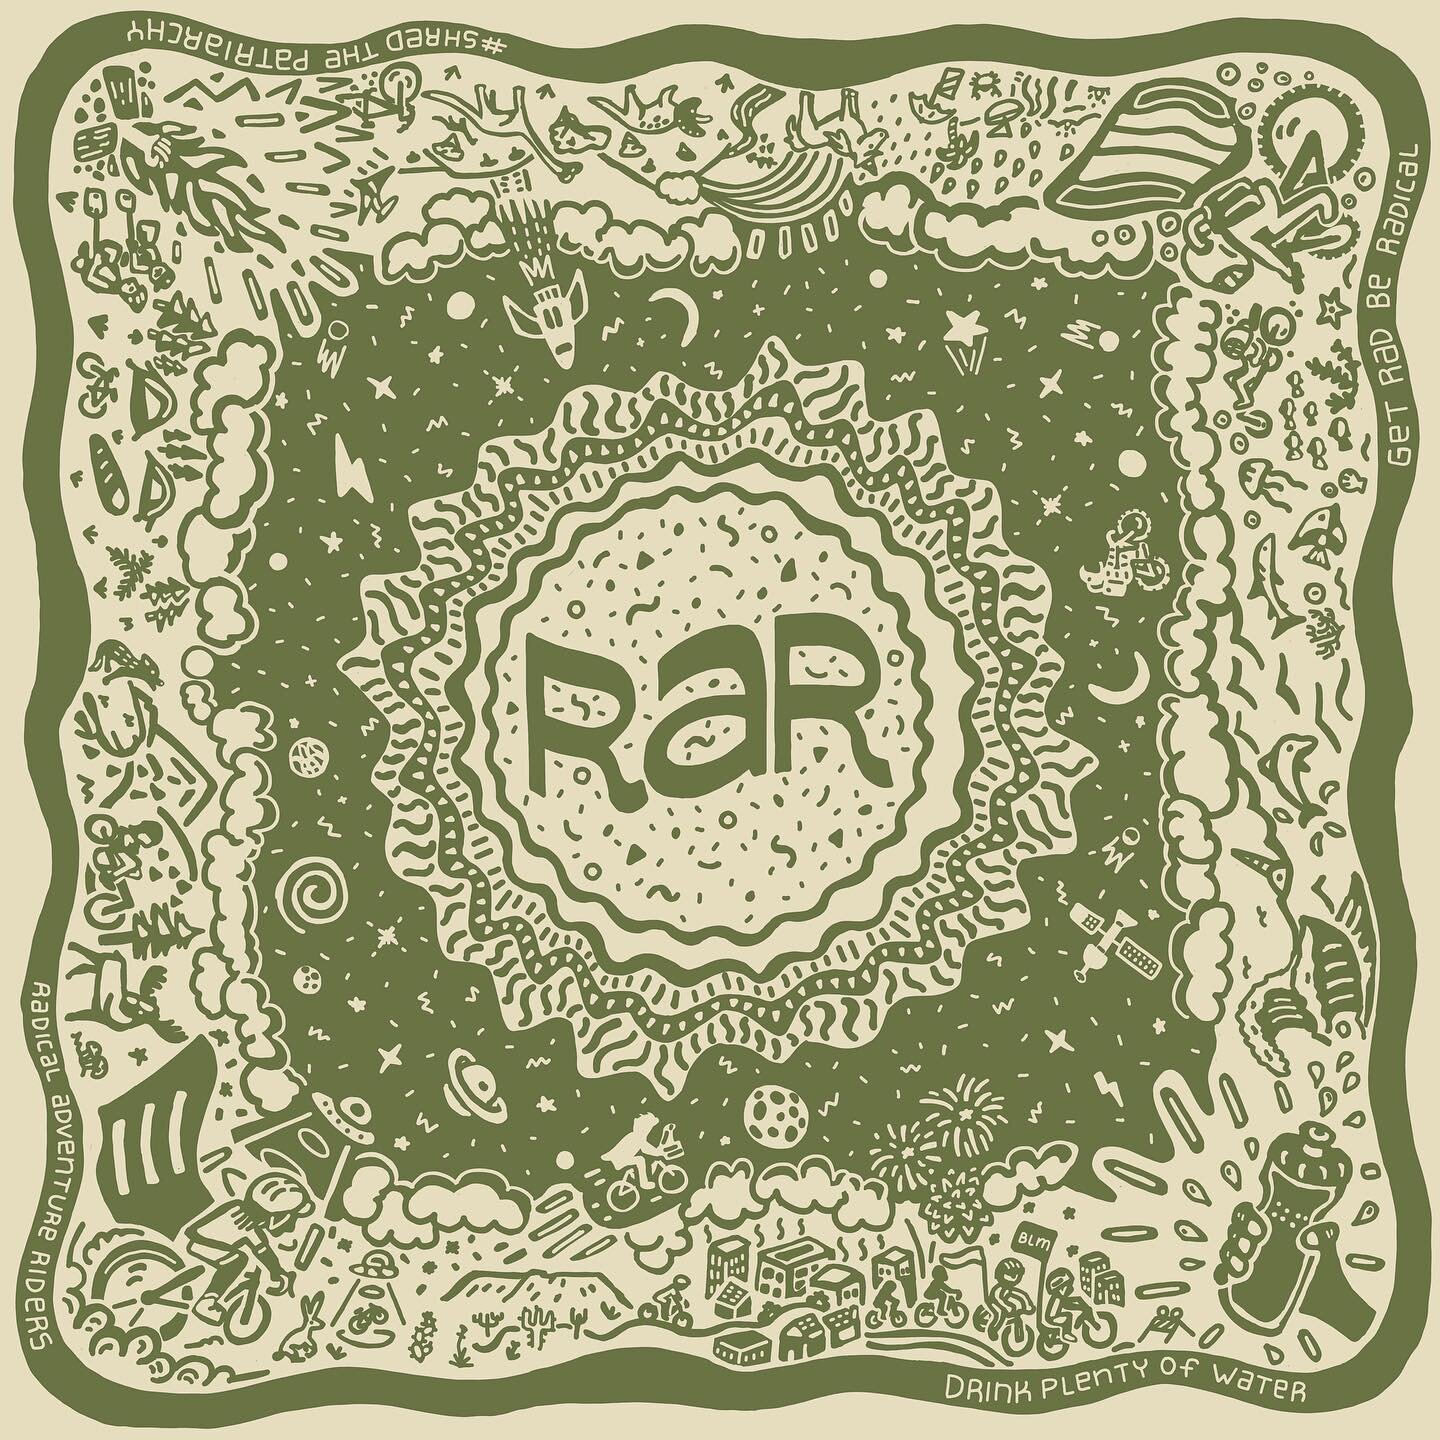 Check out this RAR Bandana design from last year! Each corner highlights a unique landscape&mdash; from biking underwater with narwhals, being abducted by ufo spaceships, showing solidarity at BLM demonstrations, and to camping with dinosaurs. RAR is